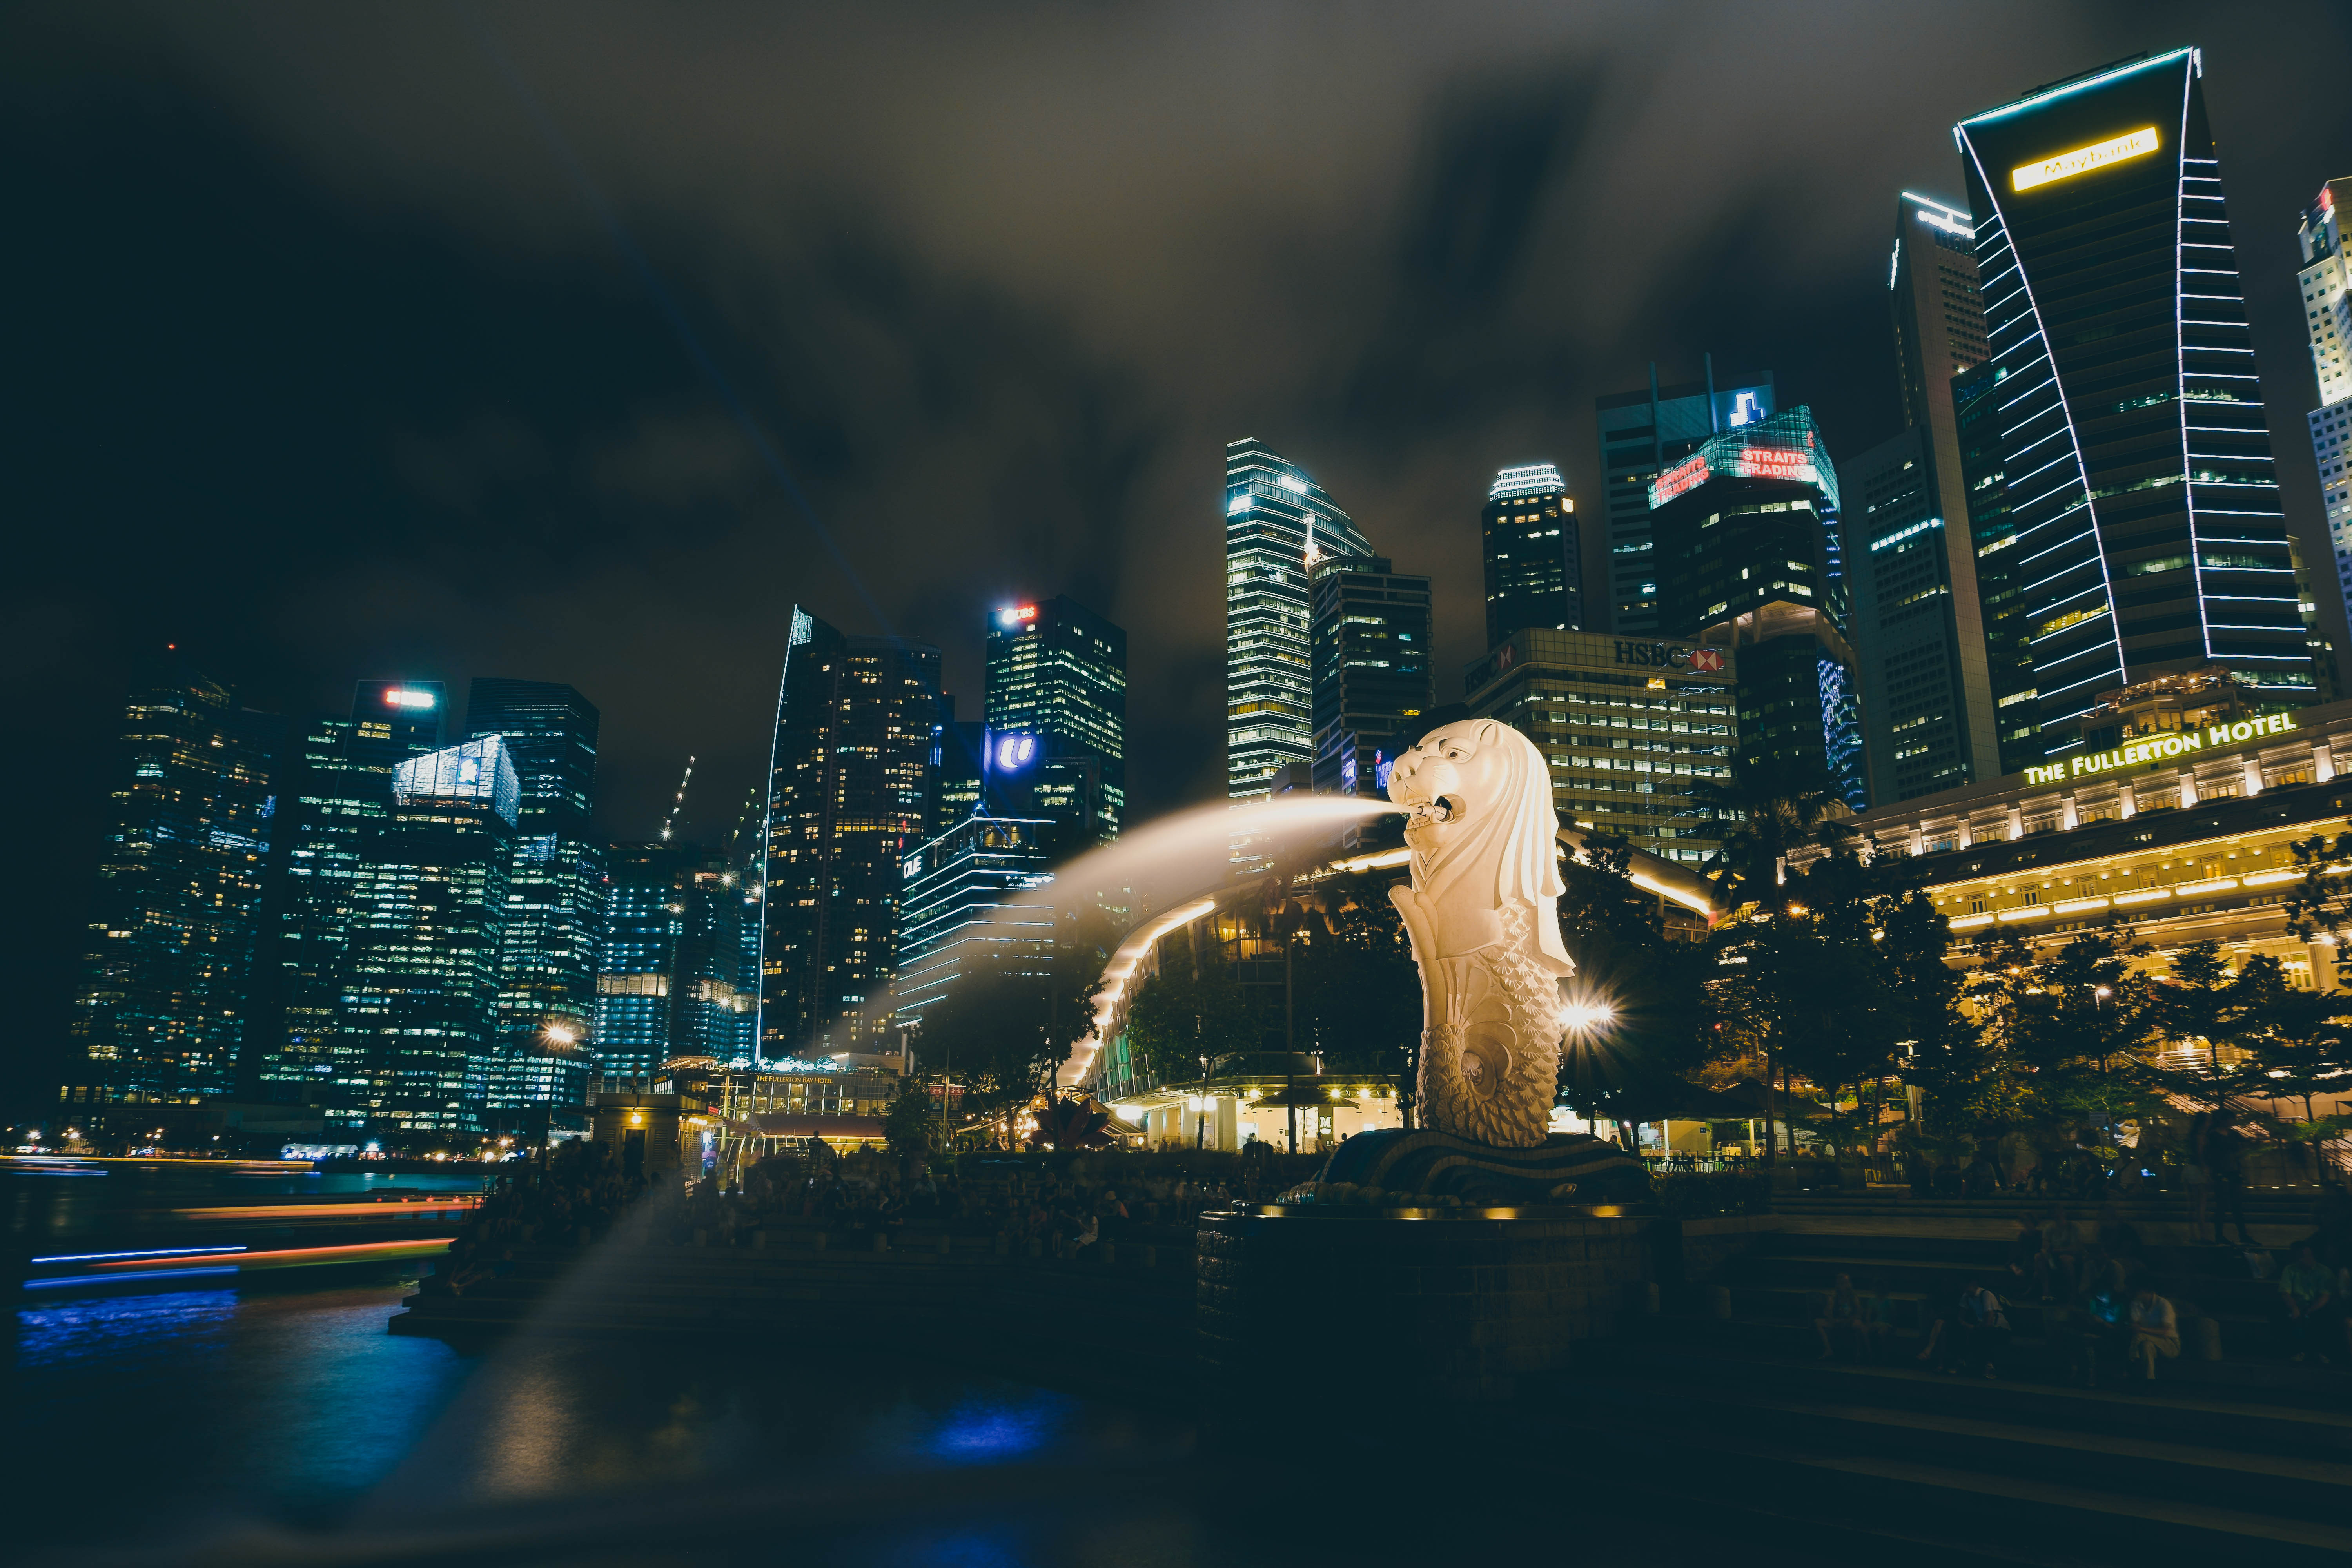 singapore, skyscrapers, cities, fountain wallpaper for mobile